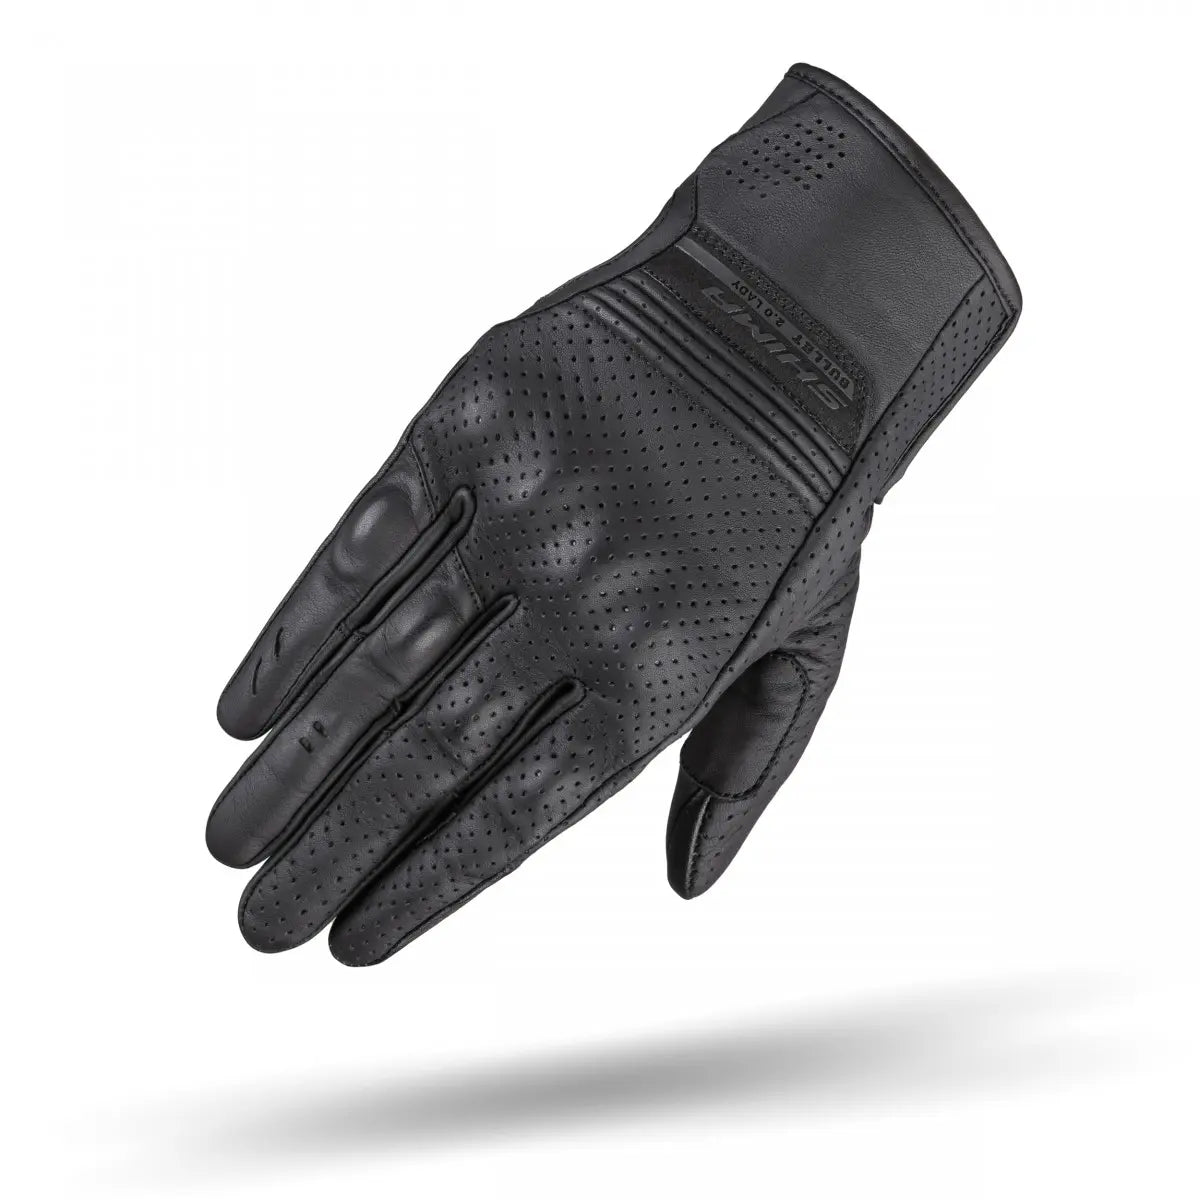 SHIMA black leather lady glove with ventilation holes